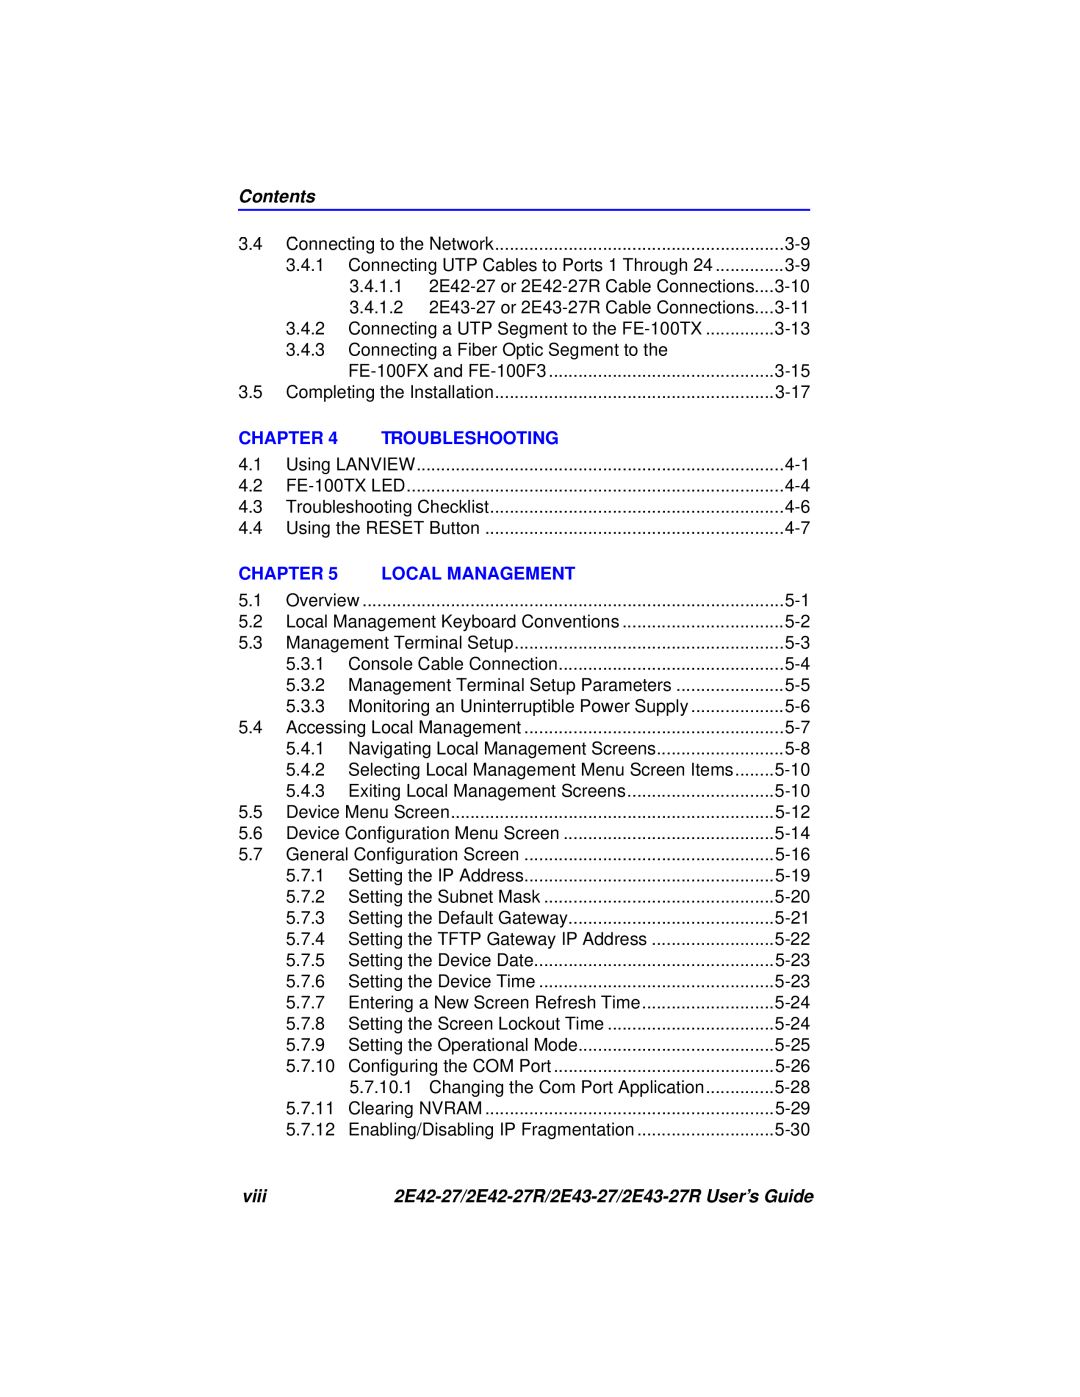 Cabletron Systems 2E43-27R, 2E42-27R manual Contents, Chapter, Troubleshooting, Local Management, viii 